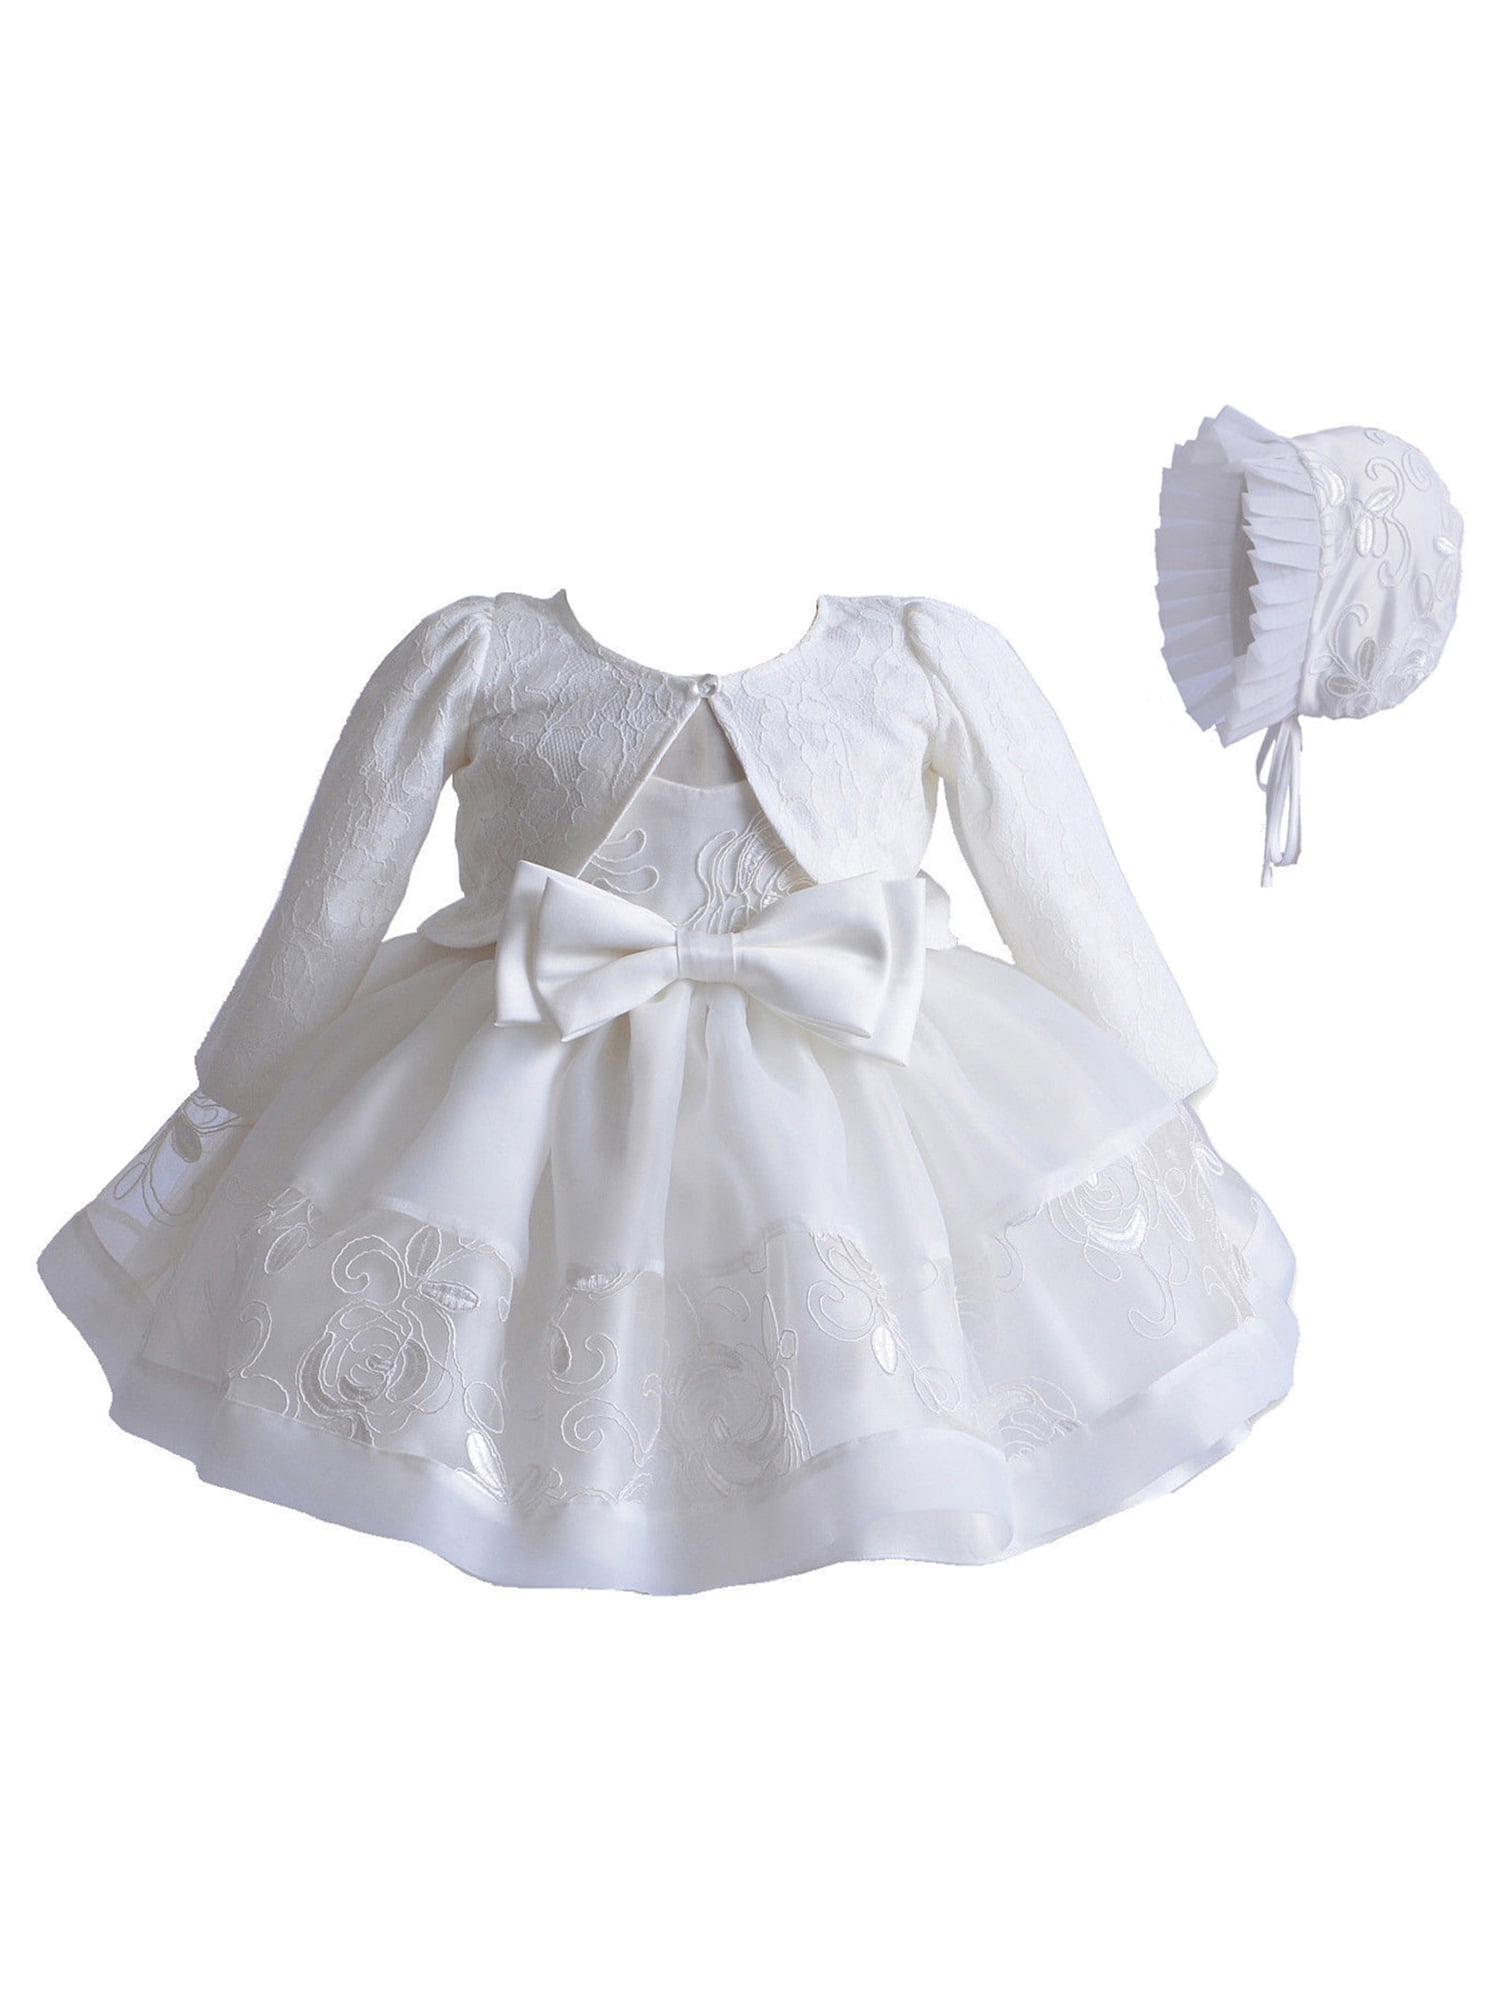 Girls White Lace Christening Gown Bolero Bonnet with Shoes 0 3 6 9 12 18 Months 